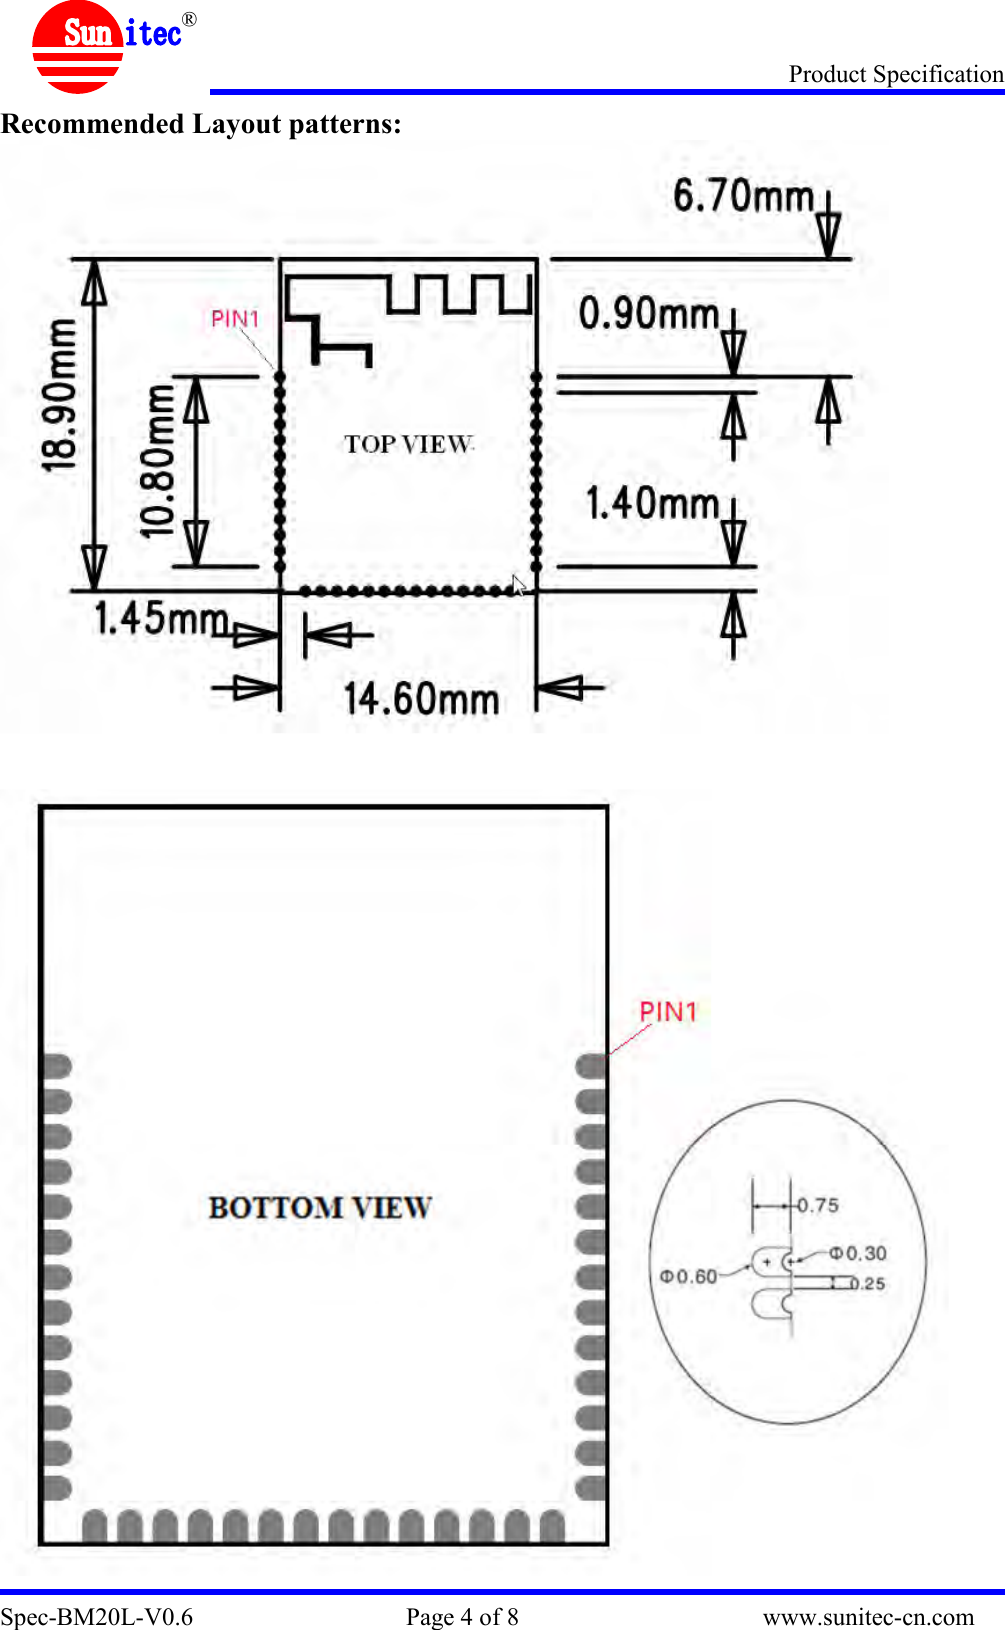 Product Specification Spec-BM20L-V0.6                                  Page 4 of 8                                       www.sunitec-cn.com  ® Recommended Layout patterns:    